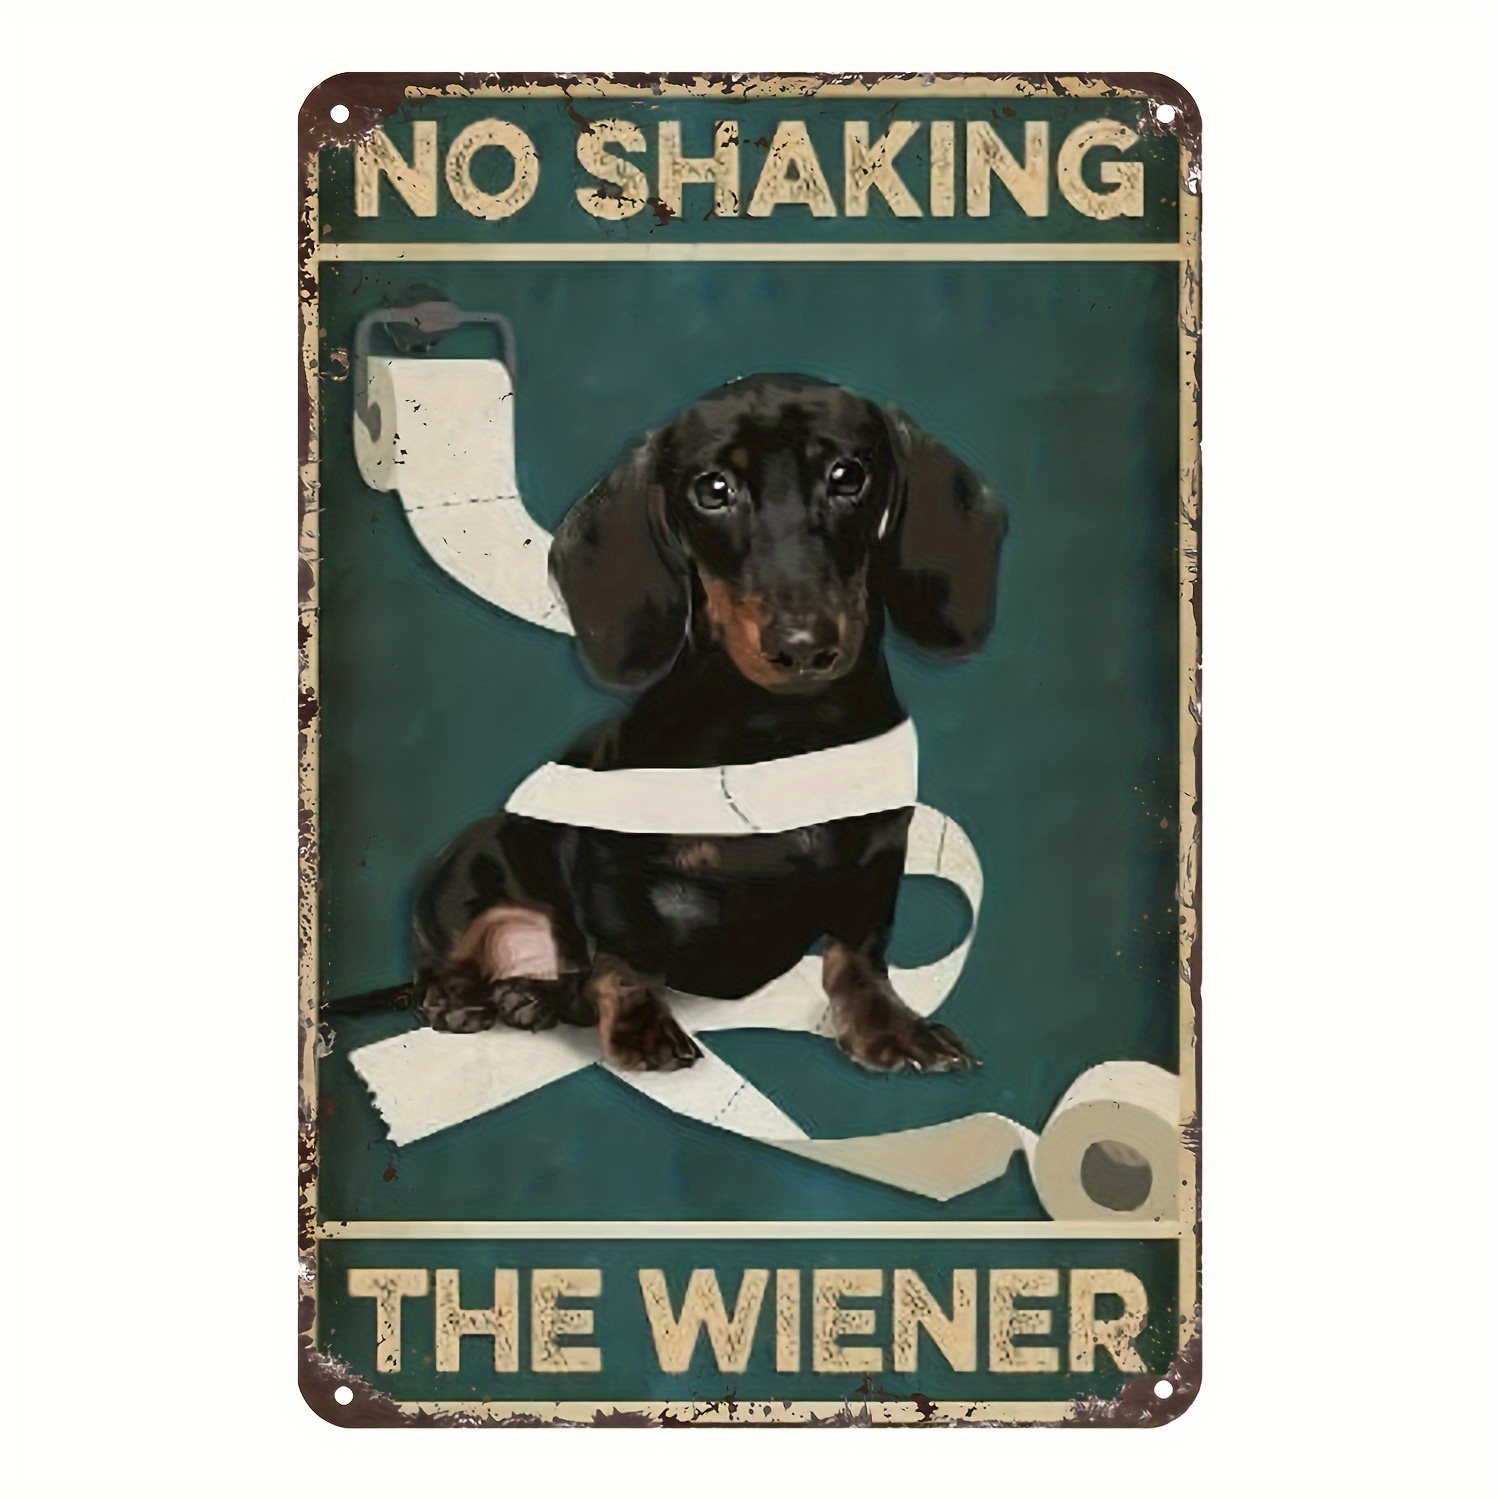 

1pc, Dachshund Bathroom Poster Tin Sign, Love Dog Poster, No Shaking The Wiener, Funny Bathroom Decor, Vintage Art Metal Sign, Aluminum Sign For Home Office Coffee Wall Decor